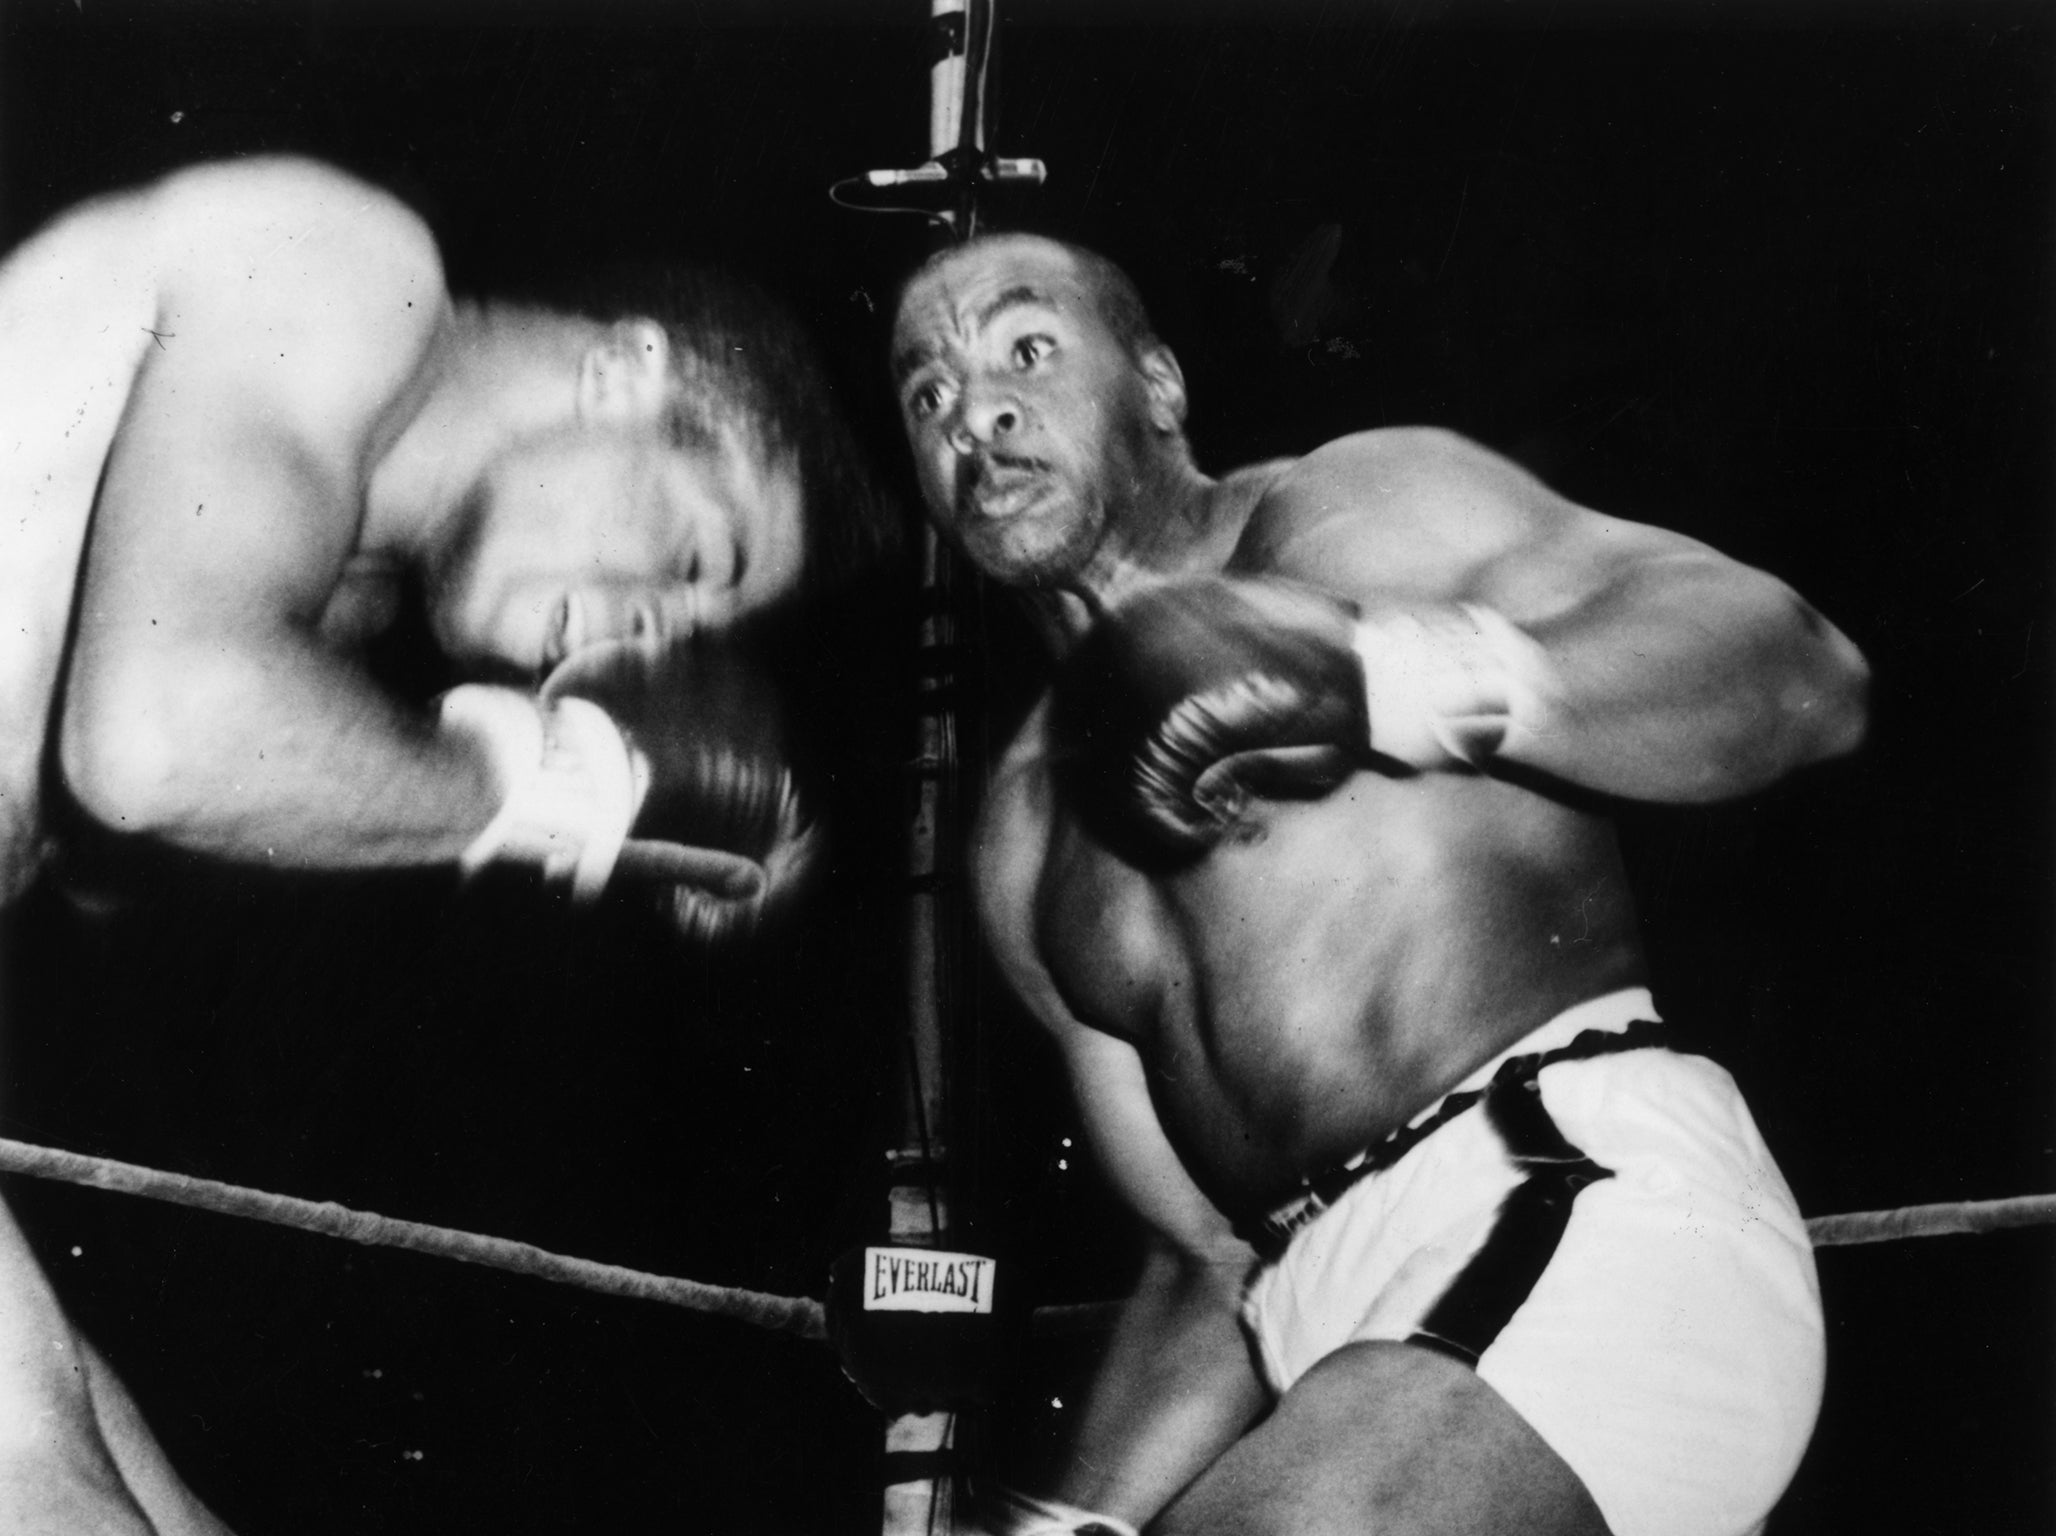 Liston went on to stop Patterson after just 126 seconds